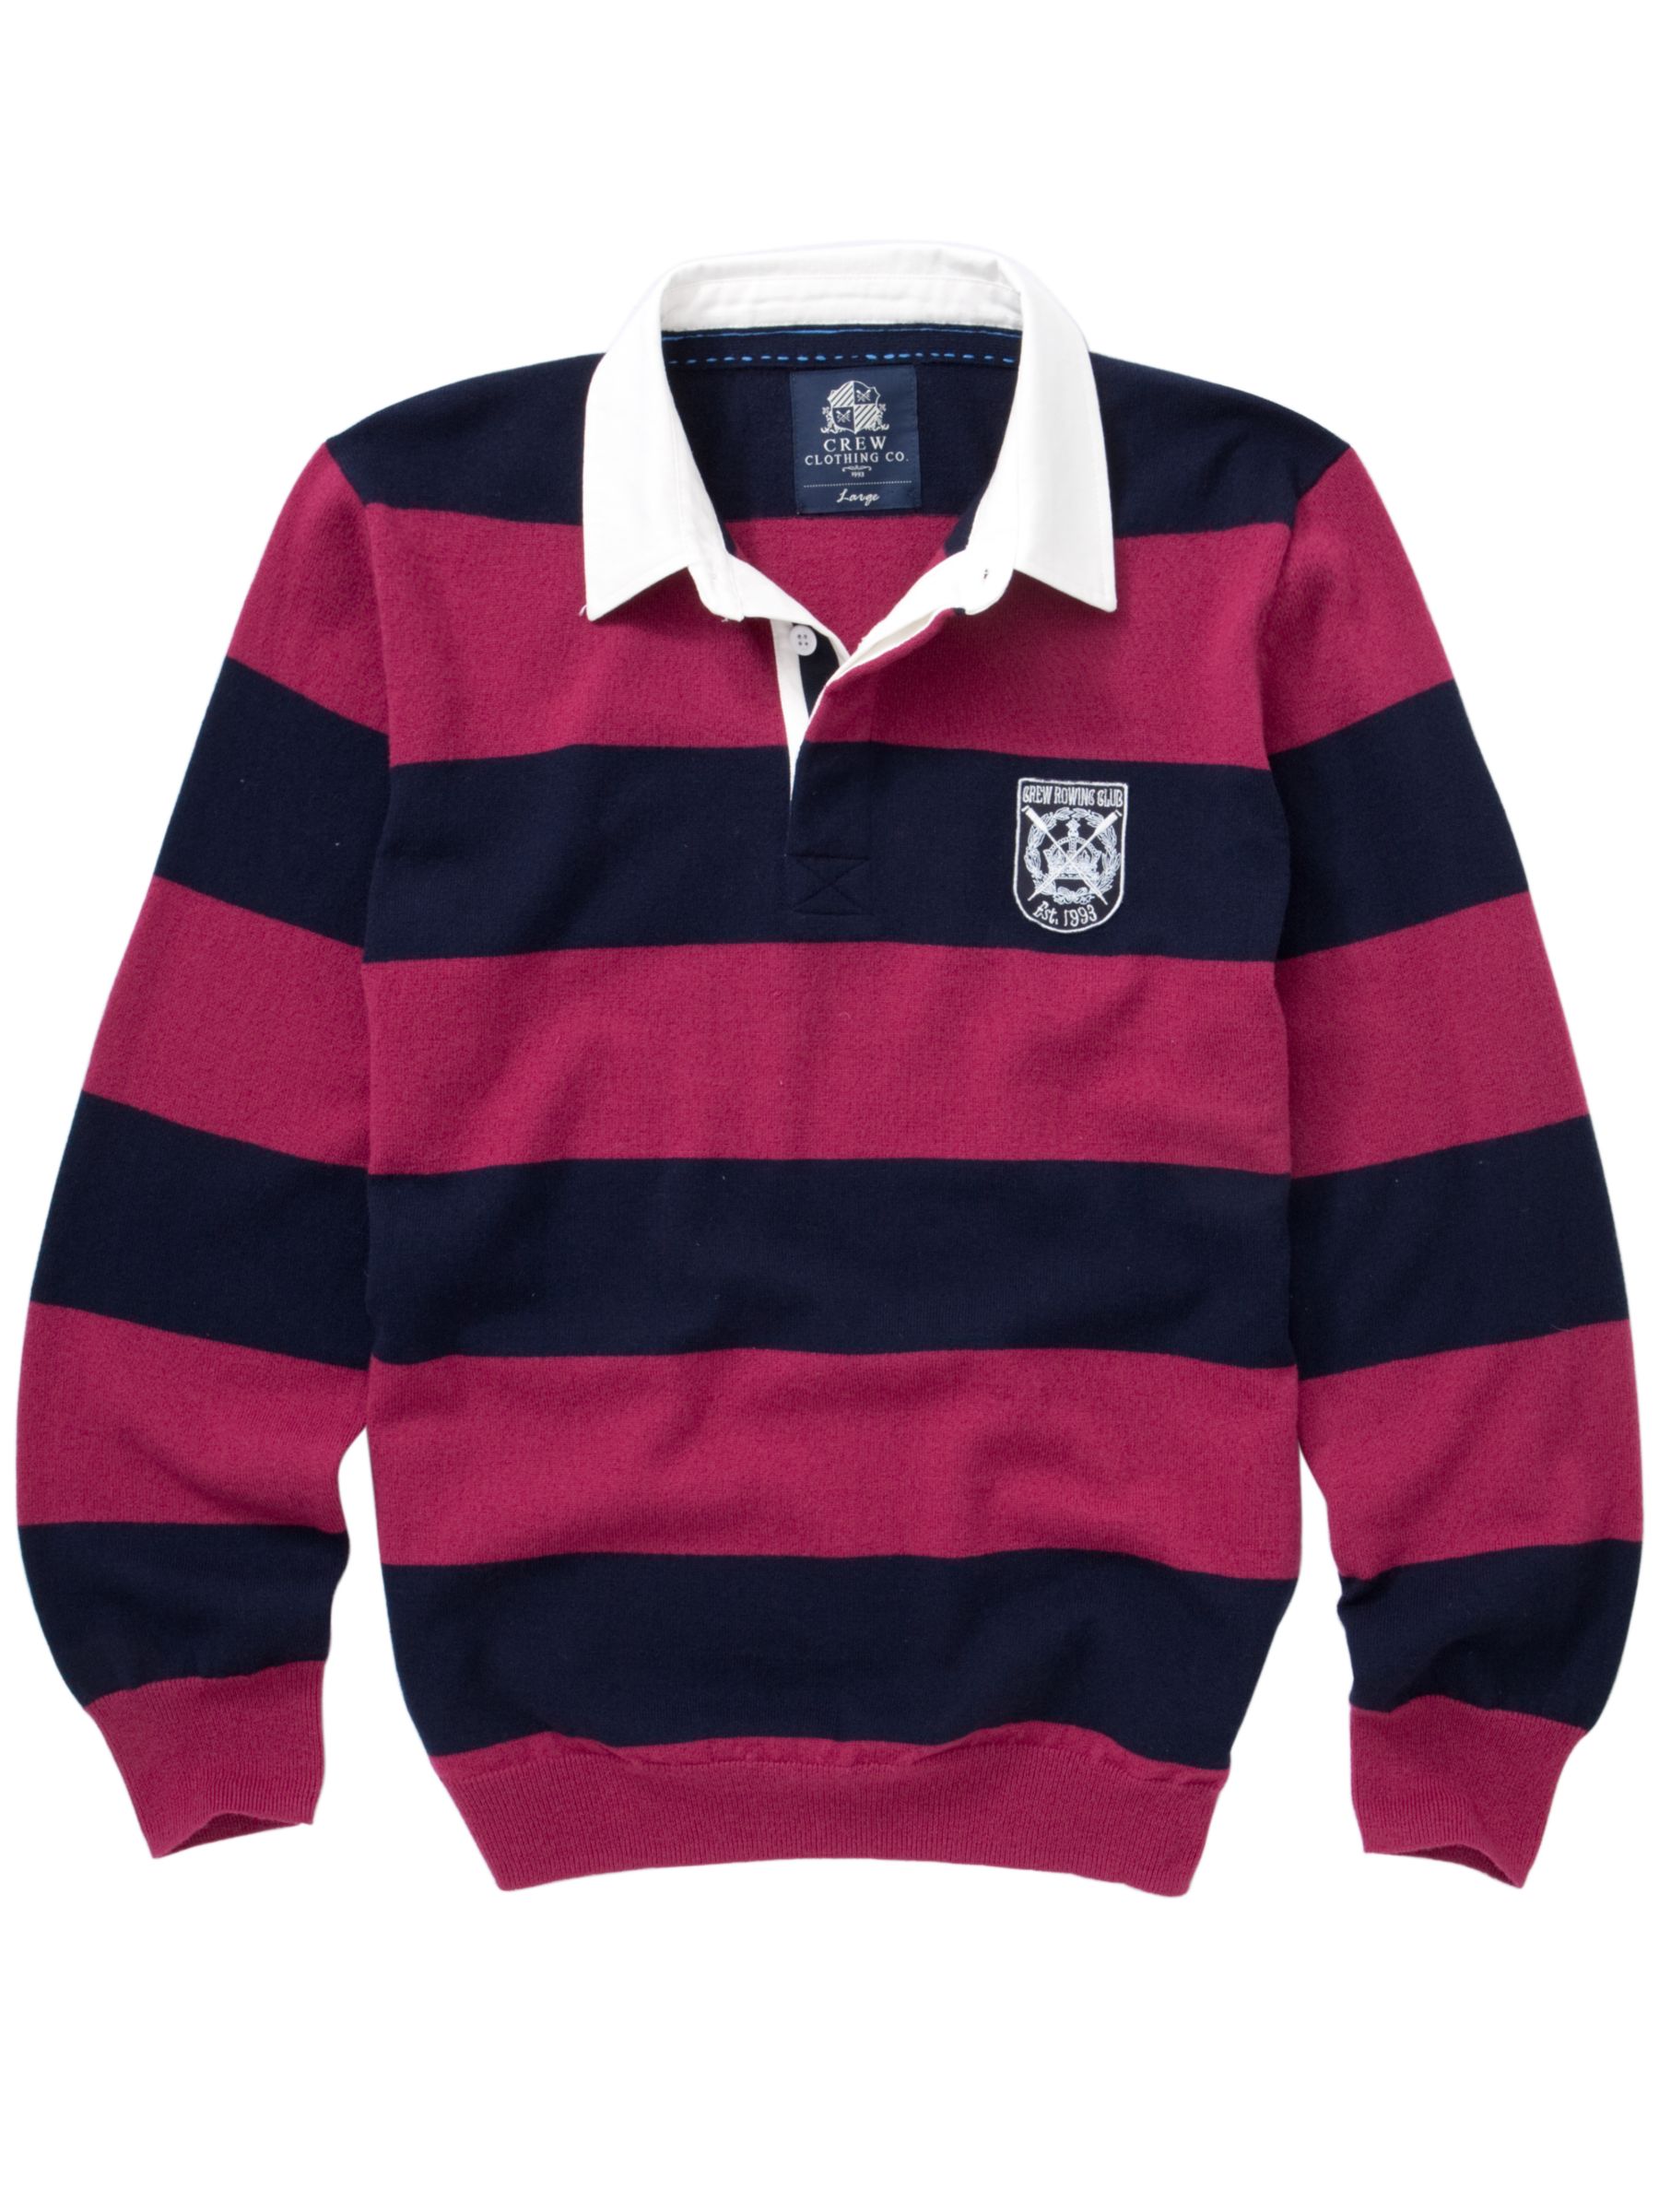 Striped Knitted Rugby Shirt, Multi